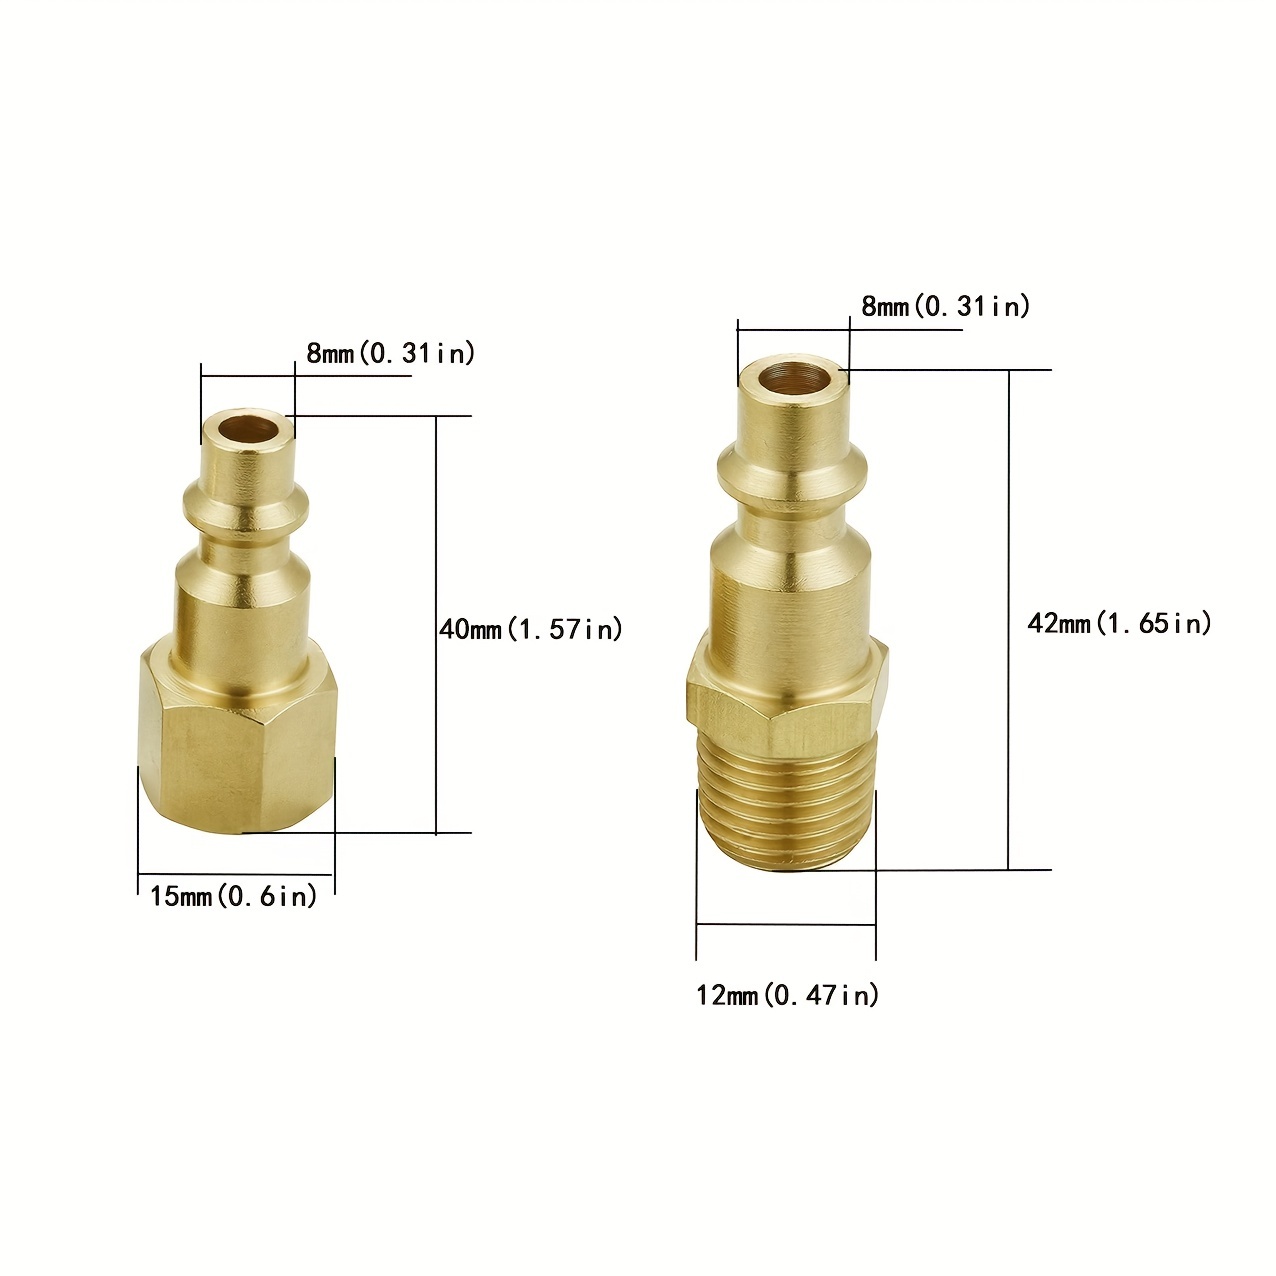 2 Sets Air Hose Fittings And Quick Connect Air Fittings, 1/4 Inch NPT Iron  Female Male Air Coupler Plug Industrial Type D, Air Compressor Fittings